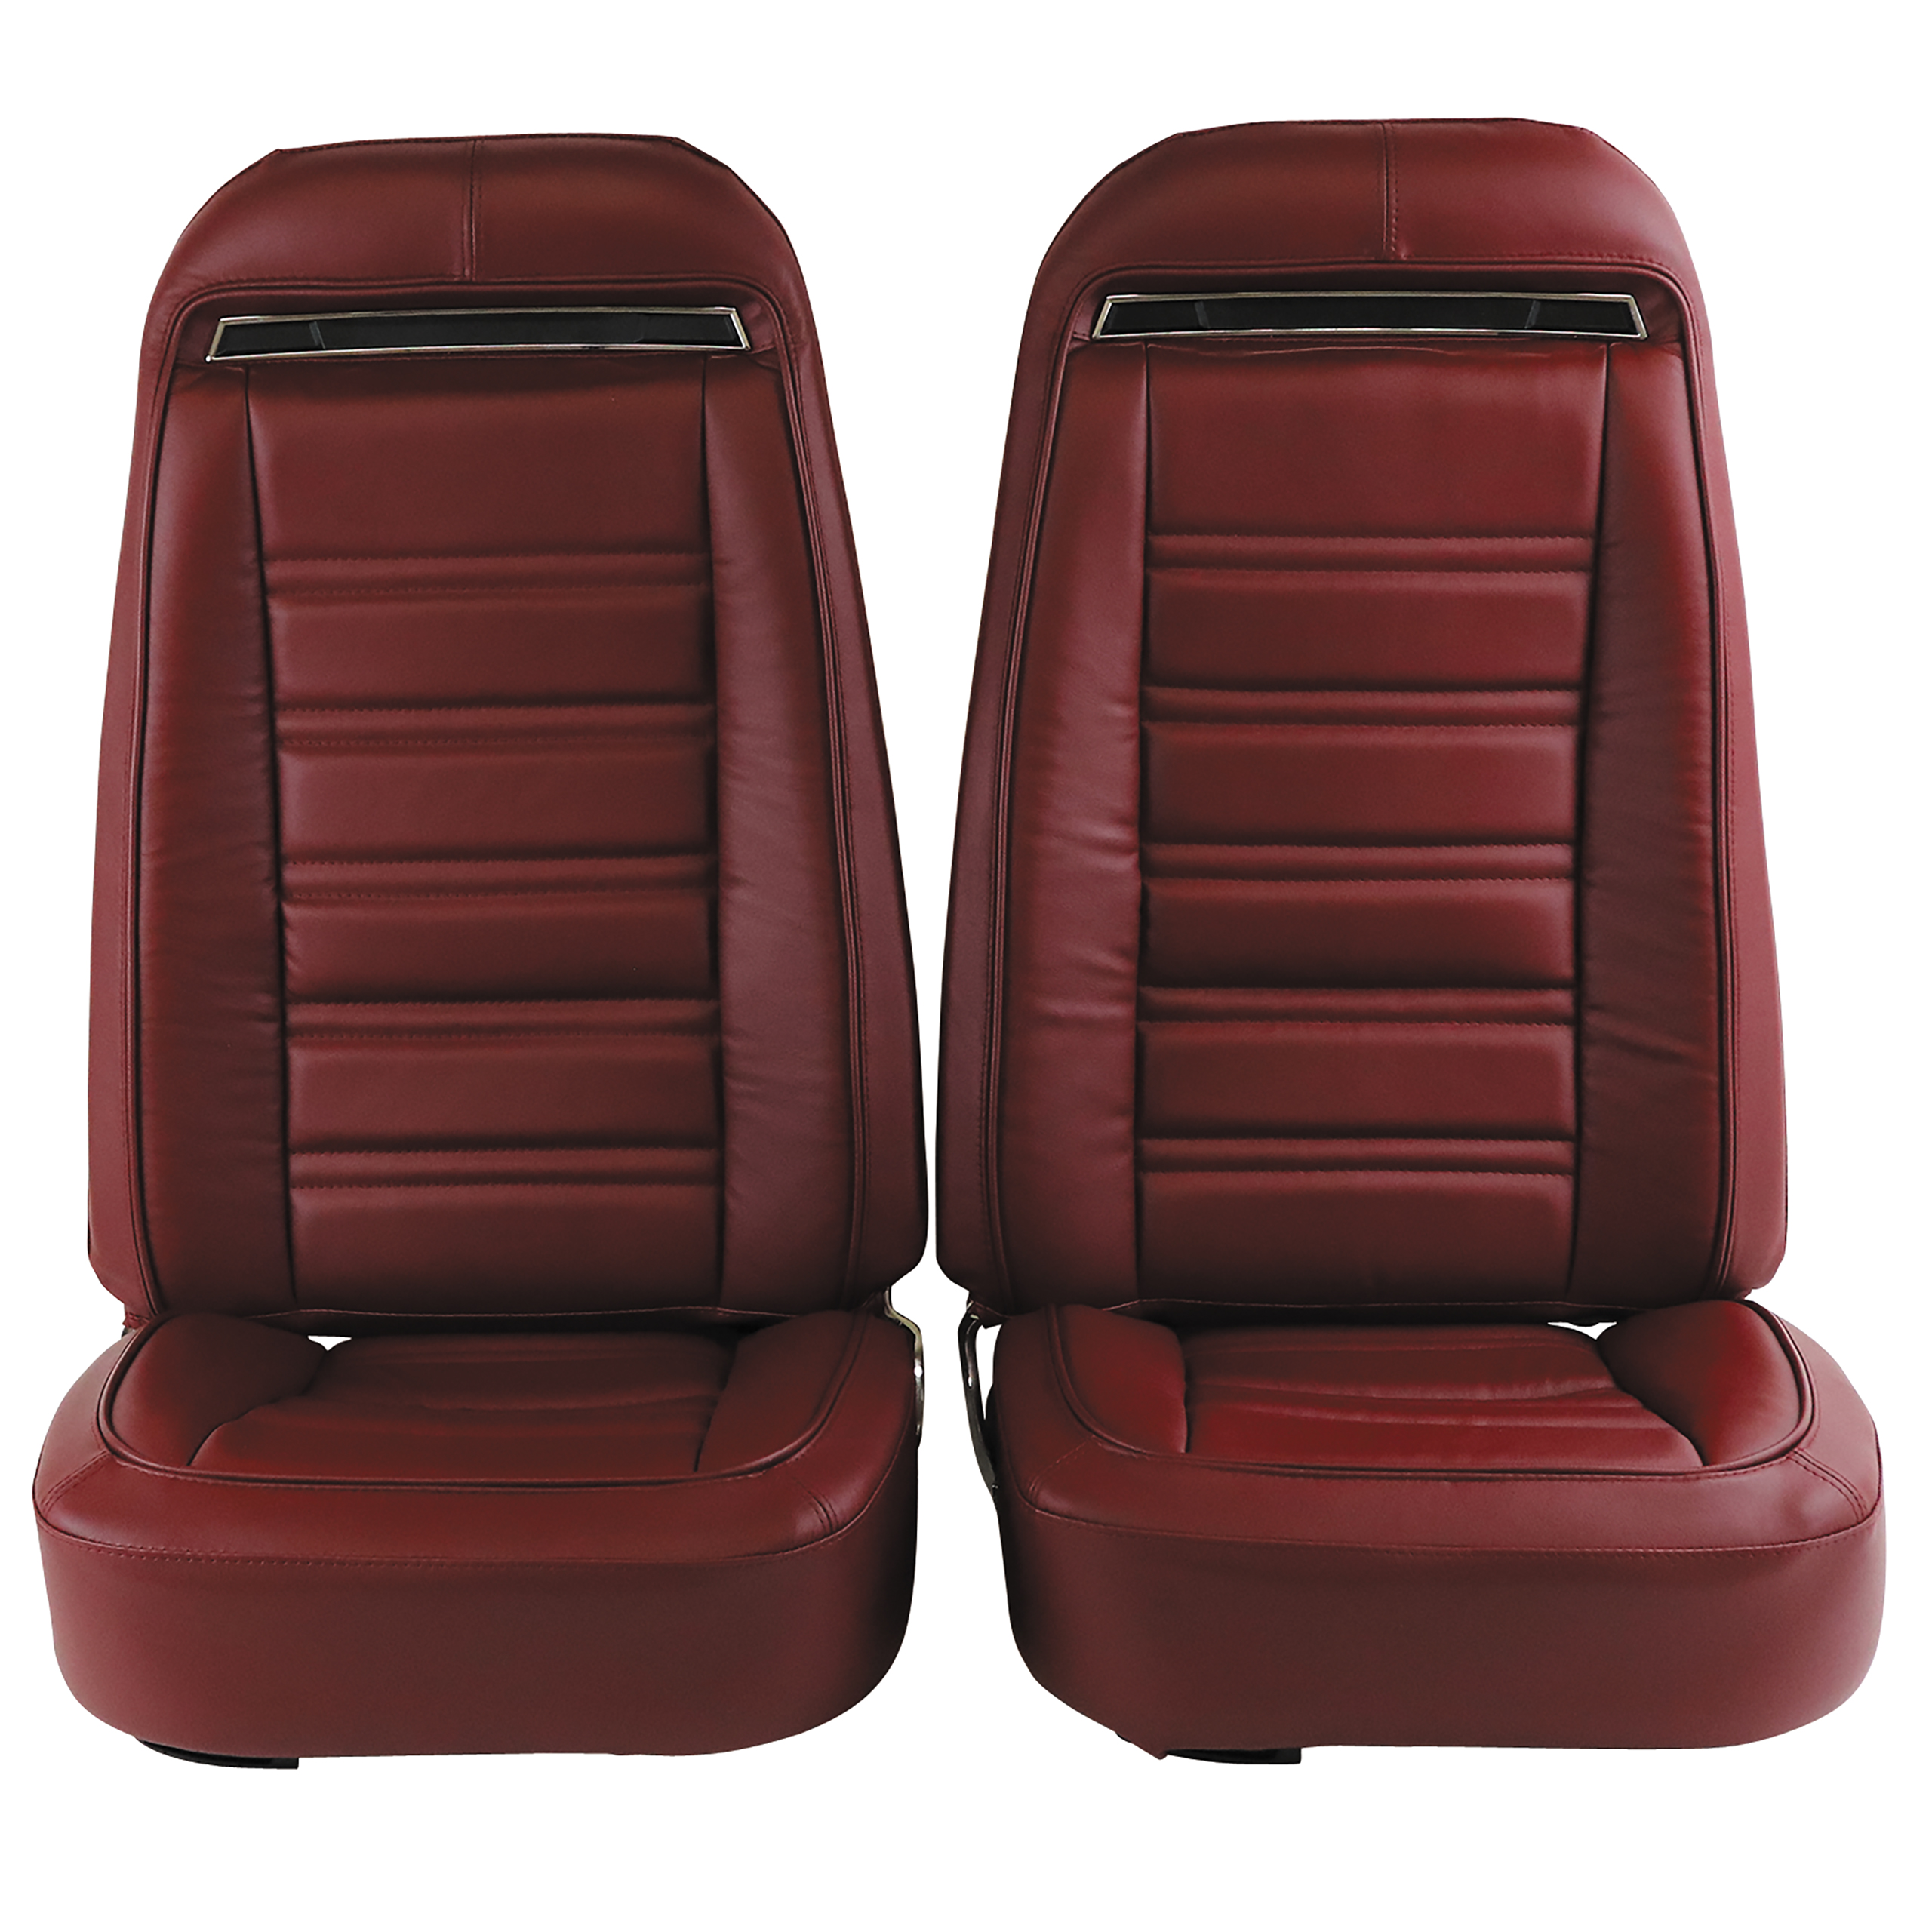 1973-1974 C3 Corvette Mounted Seats Oxblood Leather Vinyl Without Shoulder Harness